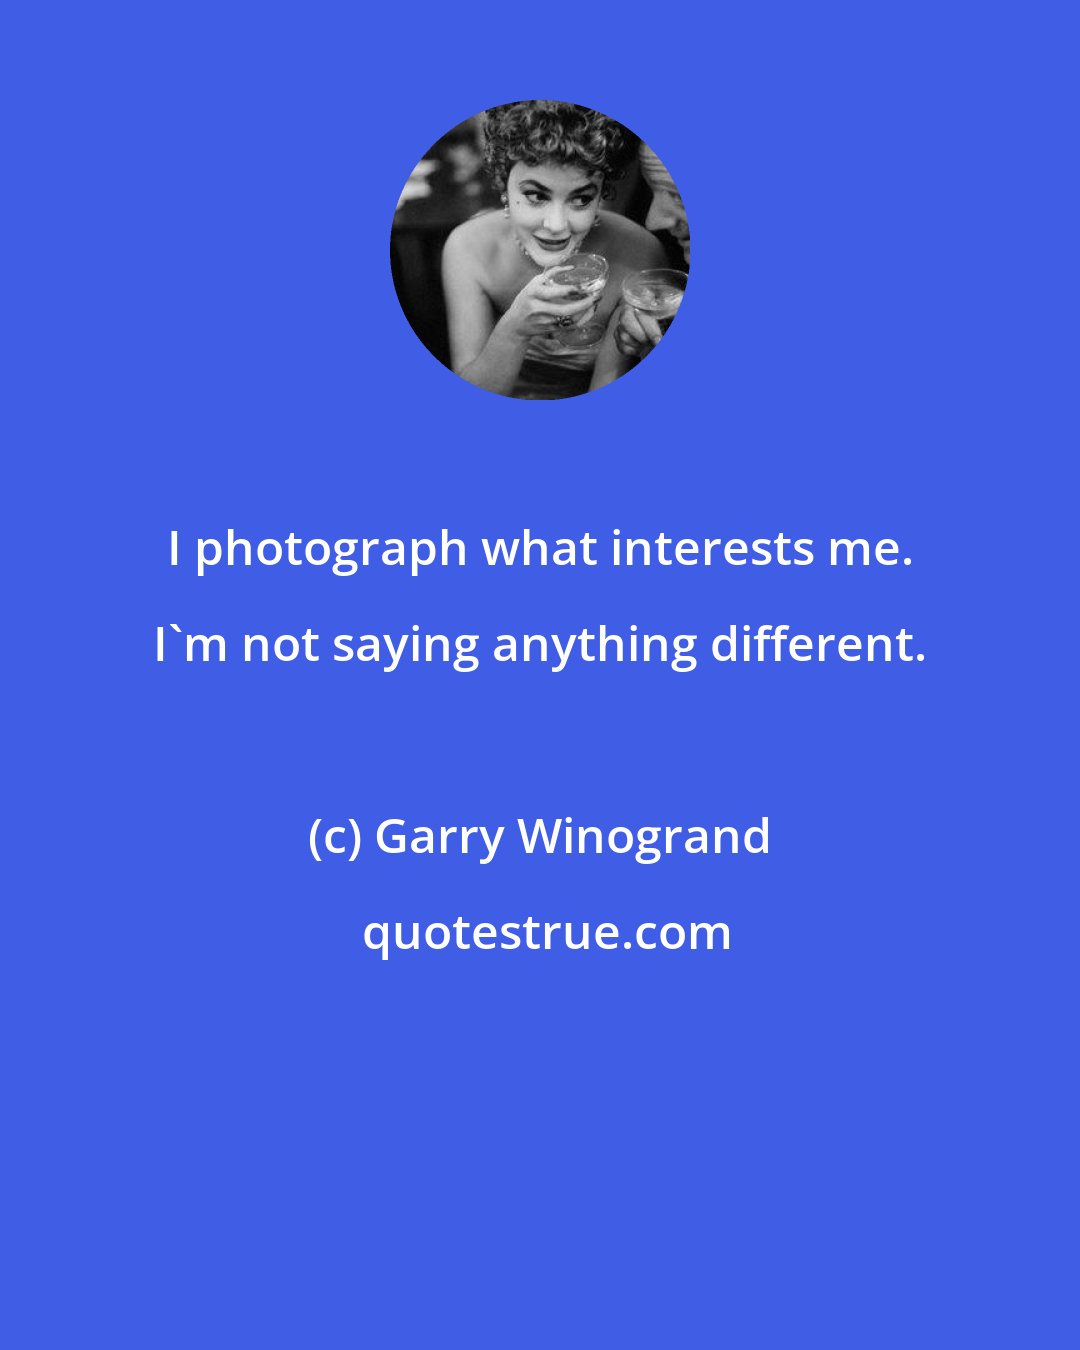 Garry Winogrand: I photograph what interests me. I'm not saying anything different.